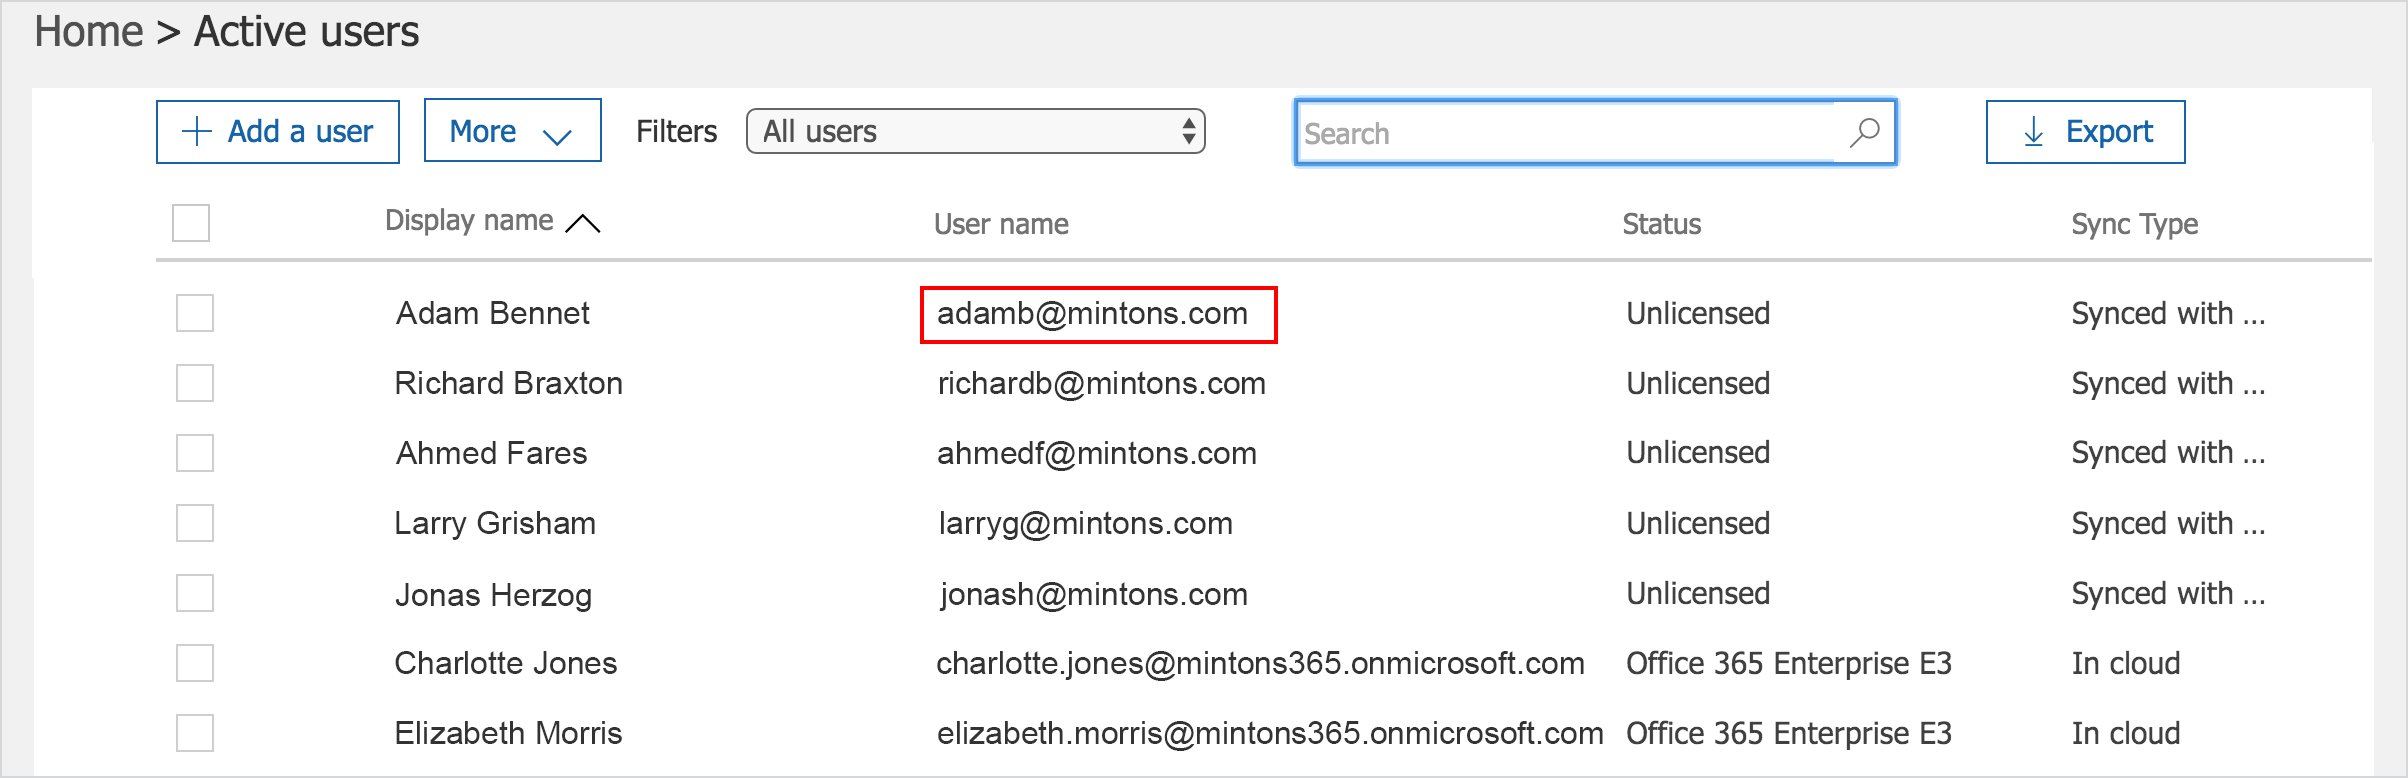 This image shows the "User name" column found by going to Home > Active Users. The example shows the user name "adamb@mintons.com".